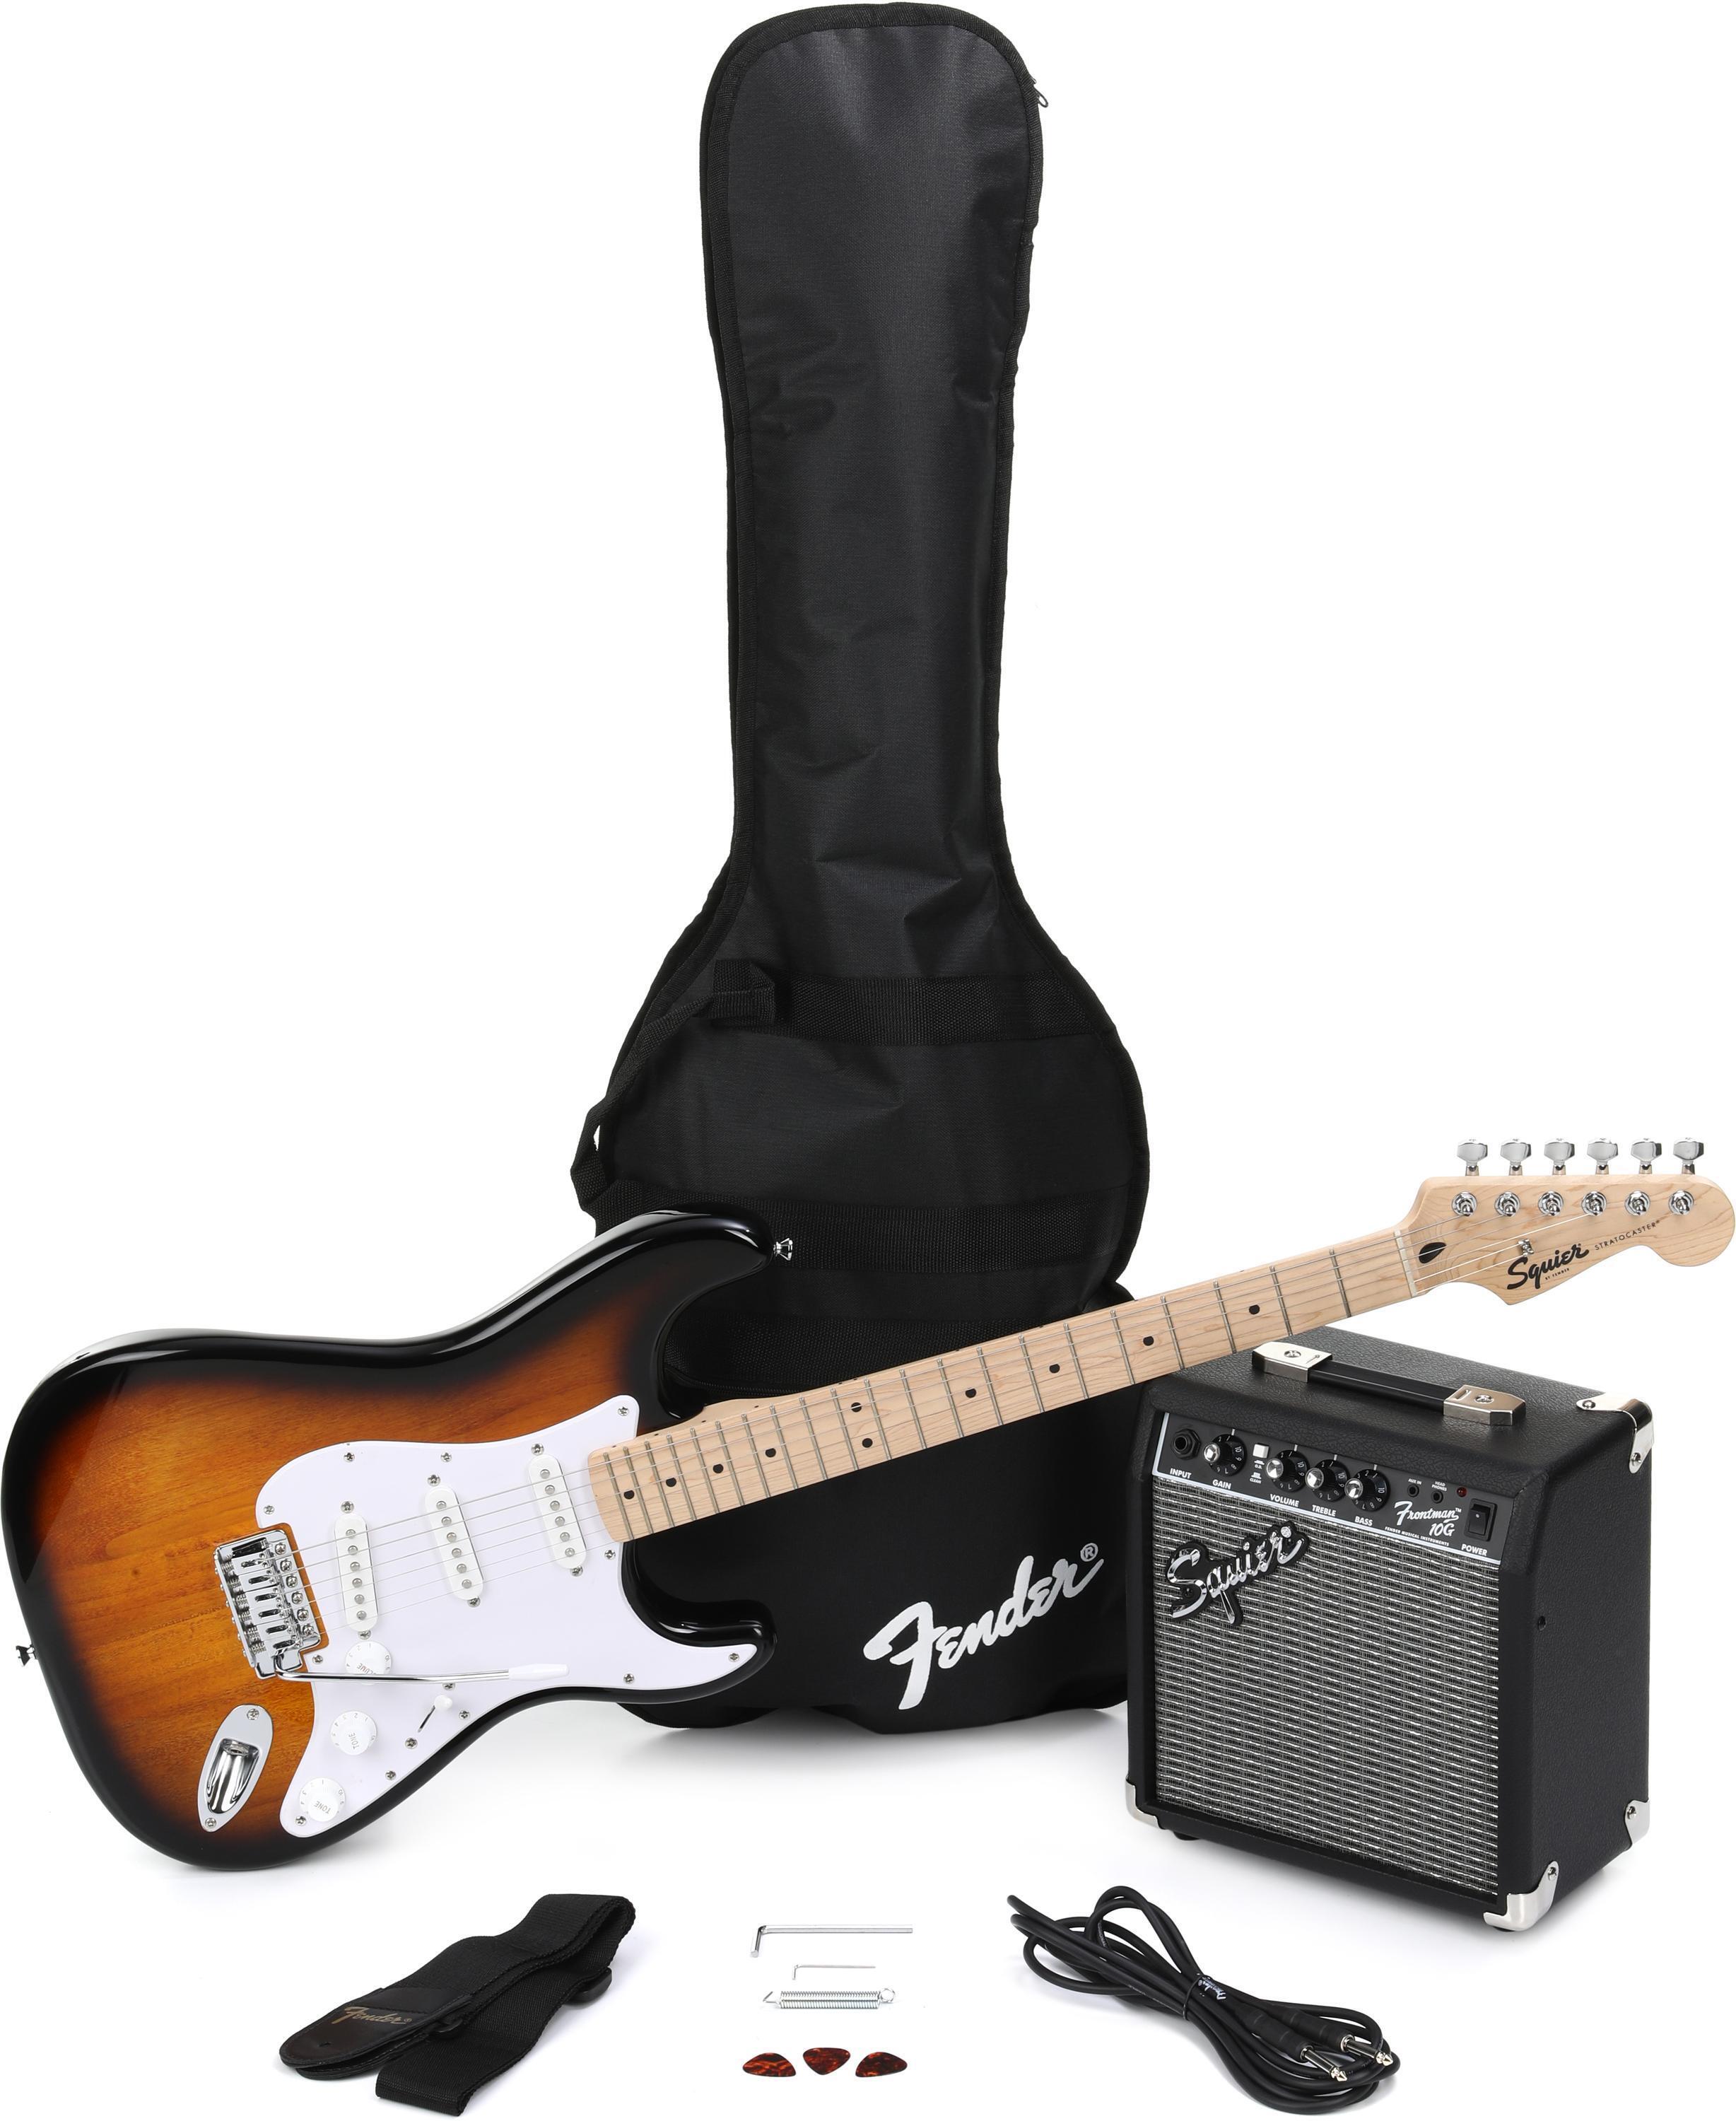 Squier Sonic Series Stratocaster Pack - 2-color Sunburst | Sweetwater